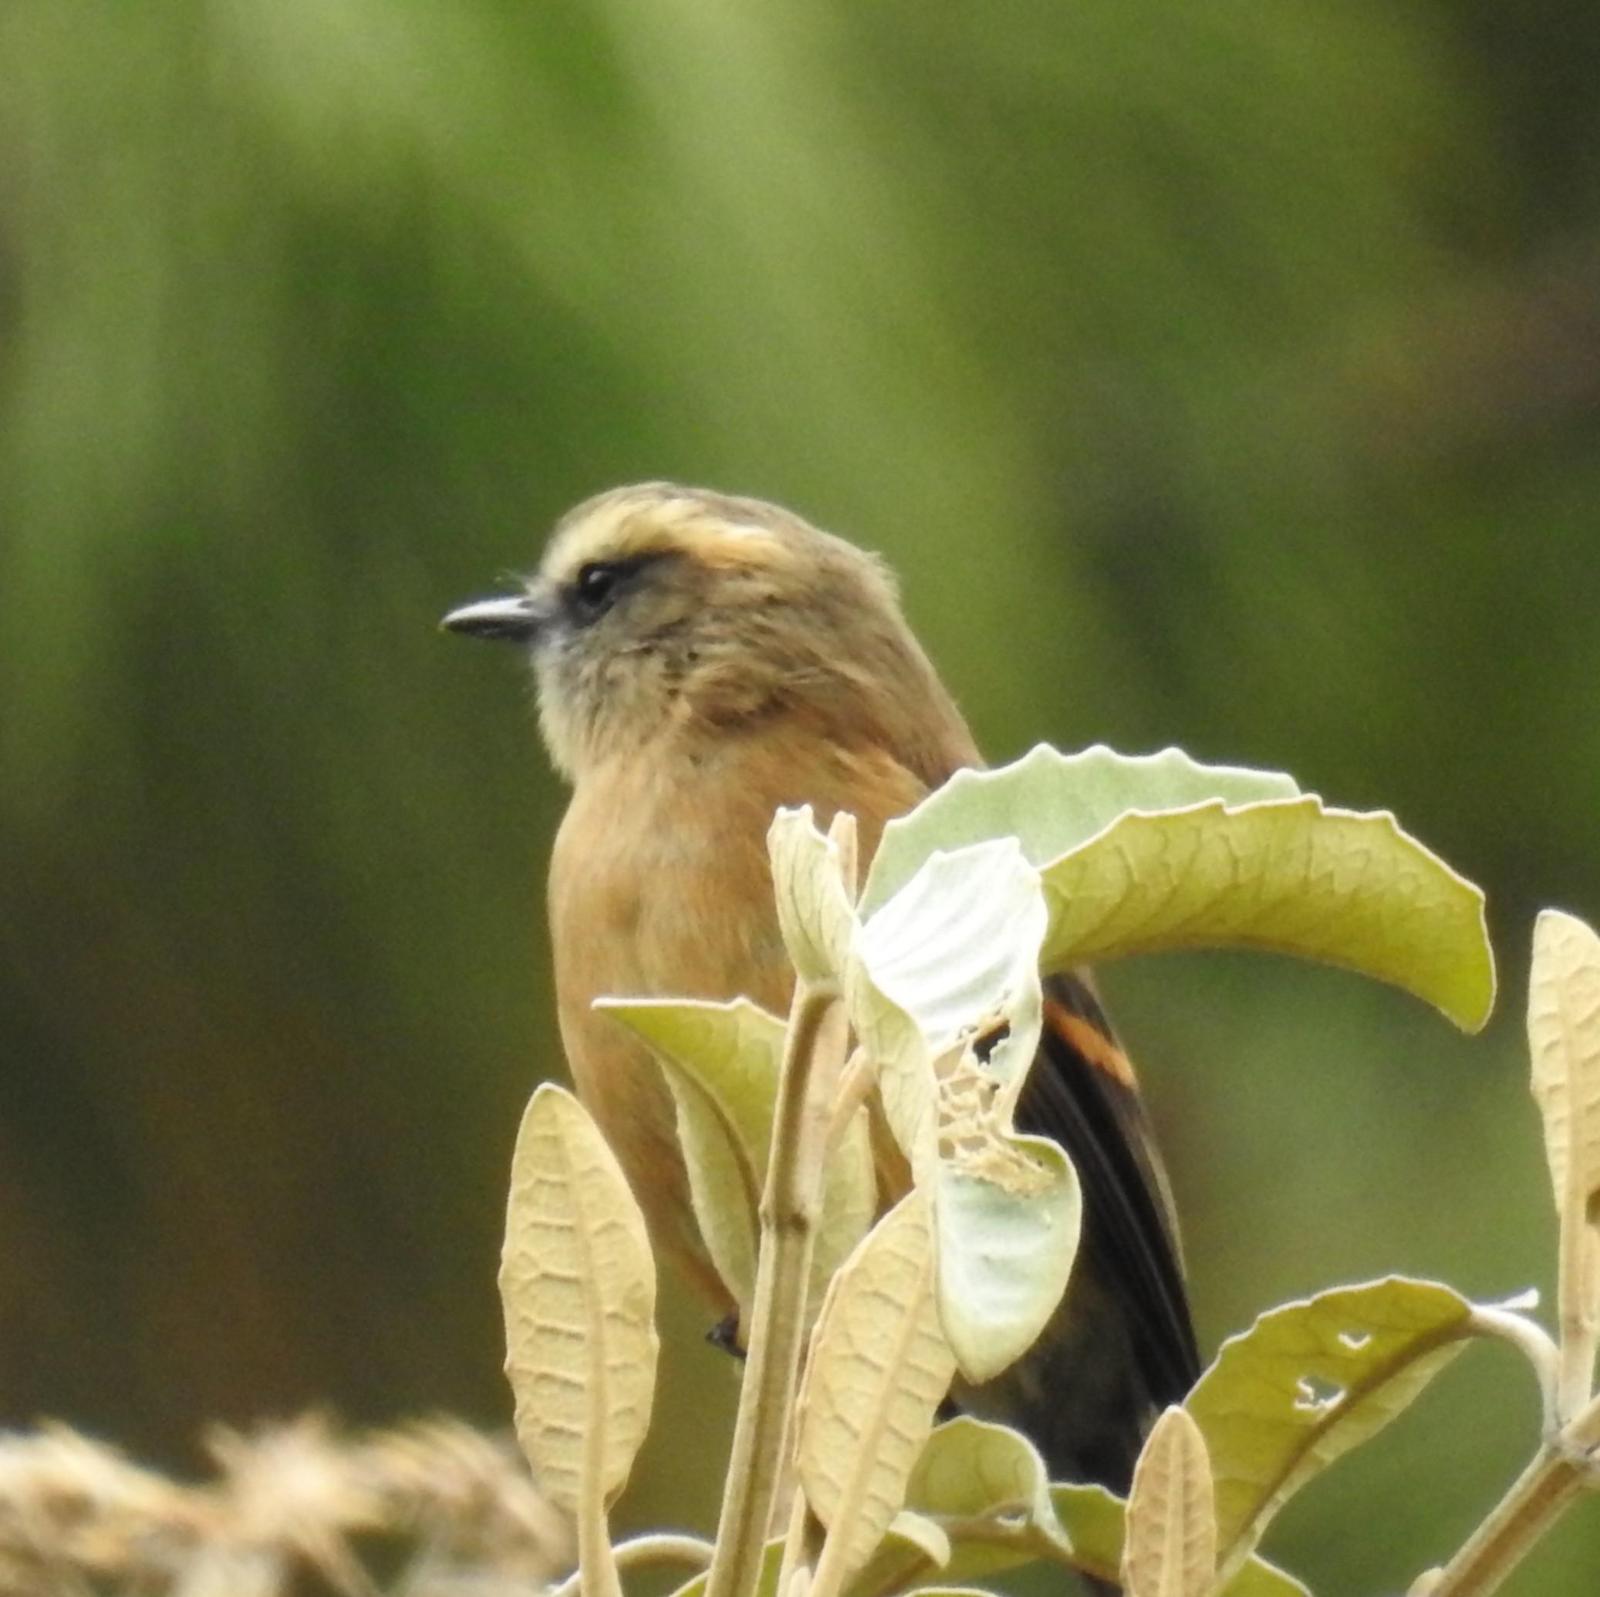 Brown-backed Chat-Tyrant Photo by John Licharson